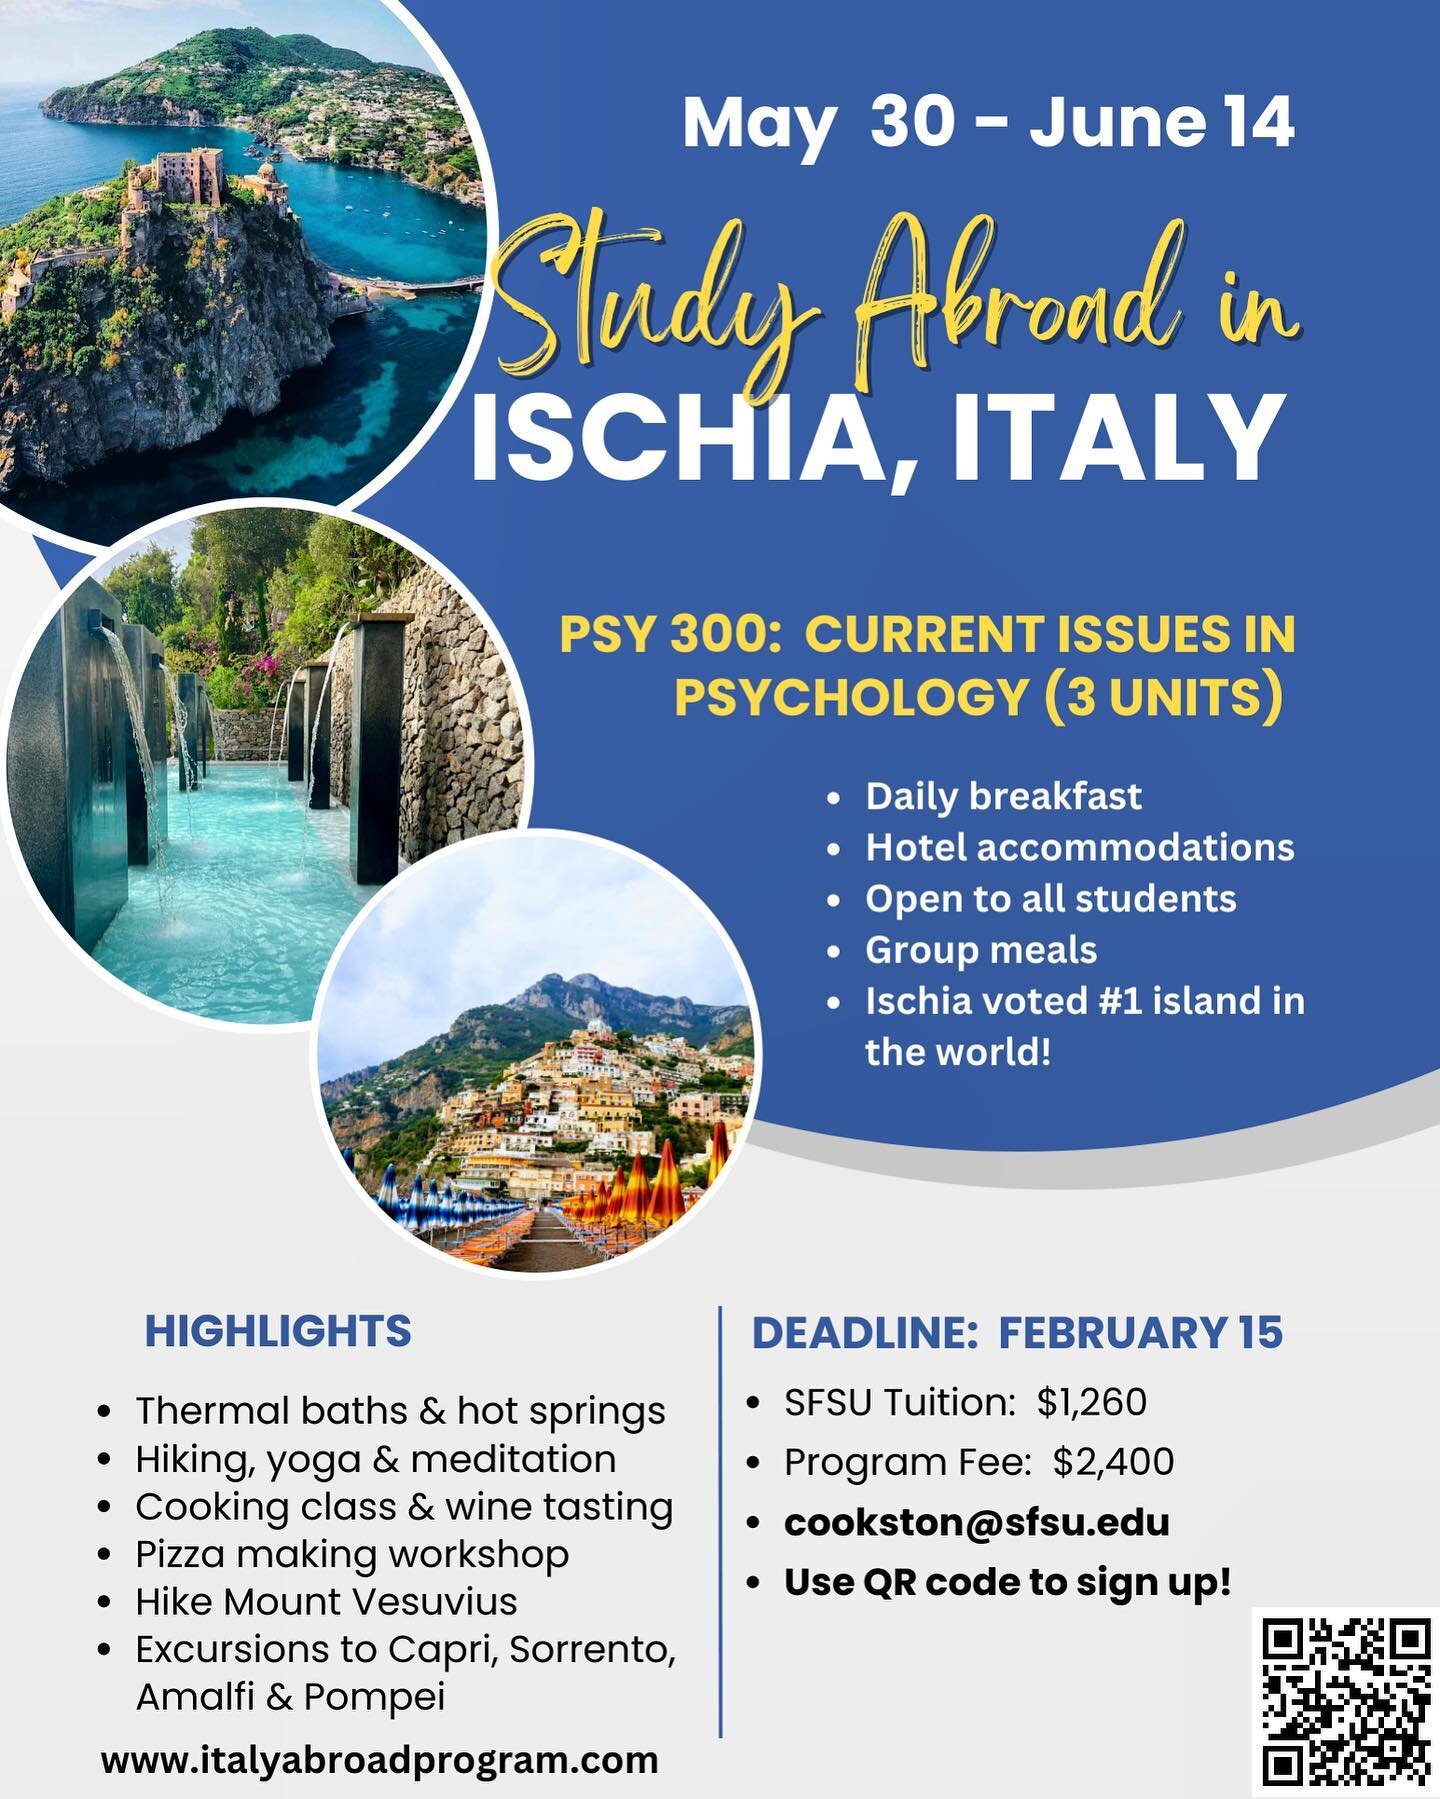 PSY 300 in Ischia, Italy!  Only a couple spots left so act fast!

OPEN TO ALL MAJORS🚨

🇮🇹Deadline - Feb. 15
🇮🇹Location - Ischia, Italy
🇮🇹Professor - Jeff Cookston Ph.D
🇮🇹Hotel, meals, daily breakfast and activities all included!

You would b